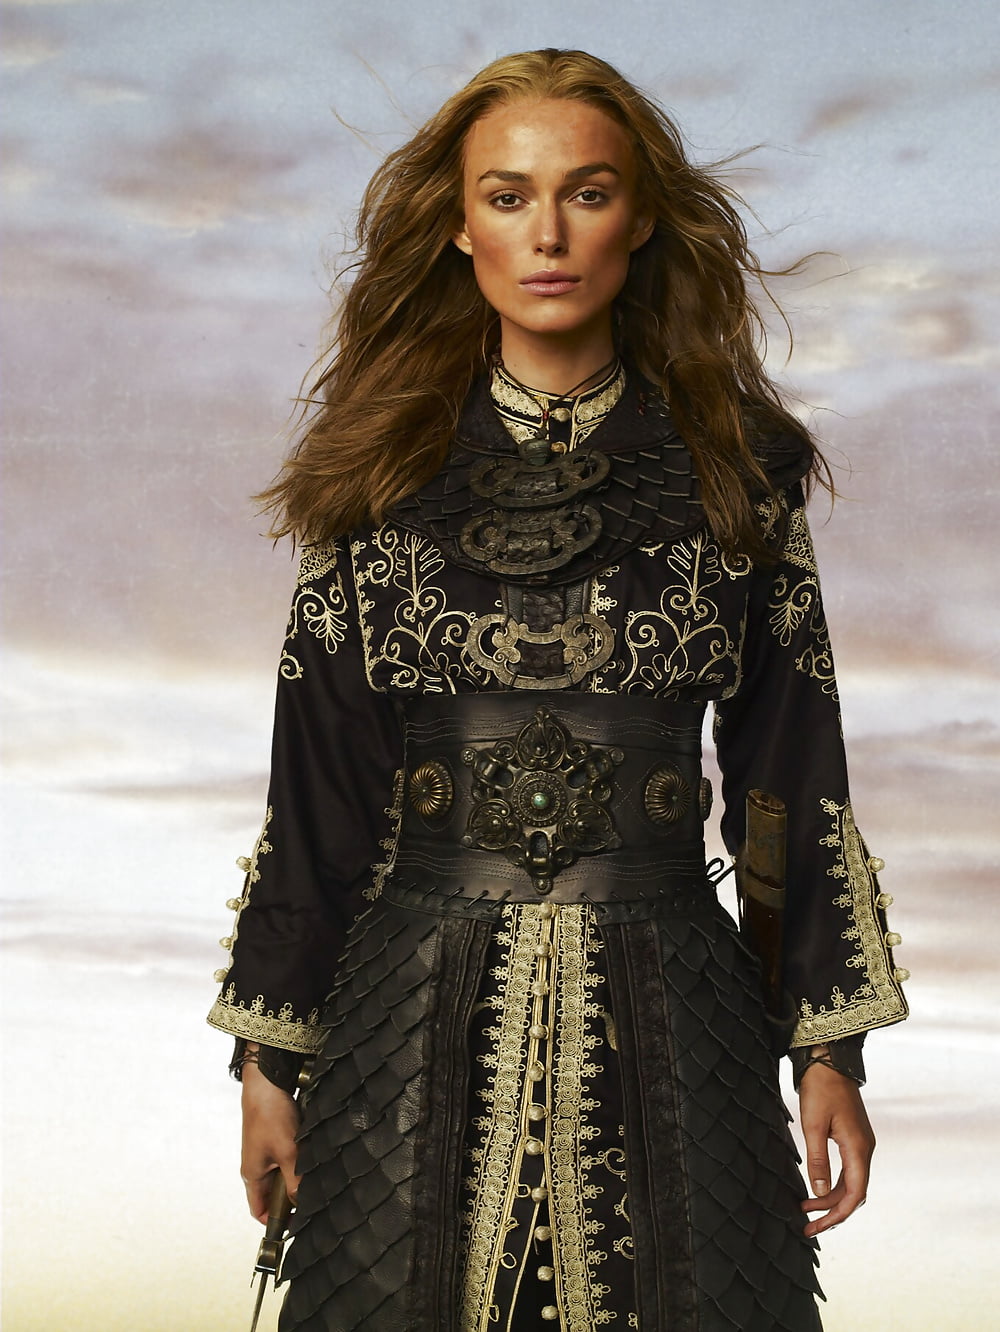 Keira Knightley POTC At Worlds End promoshoot _2007_ (4/26)